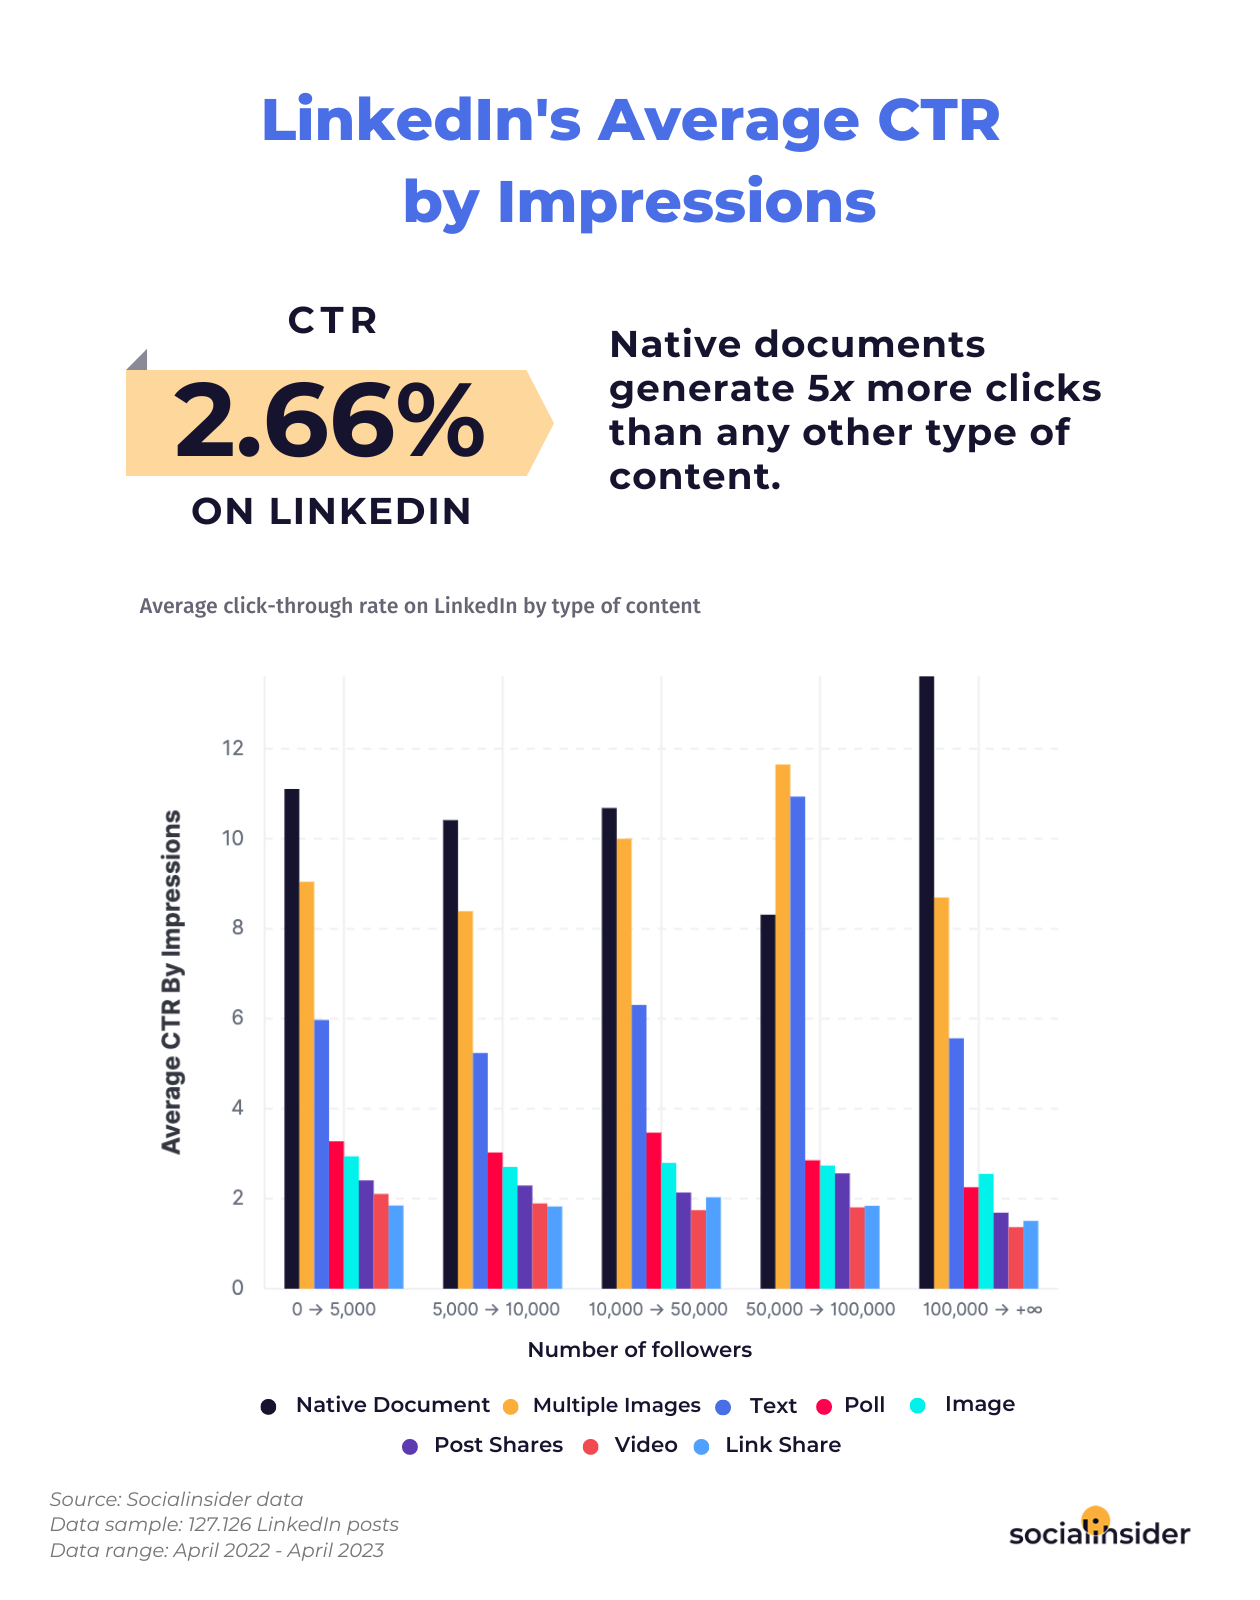 chart about linkedin's average ctr by impressions